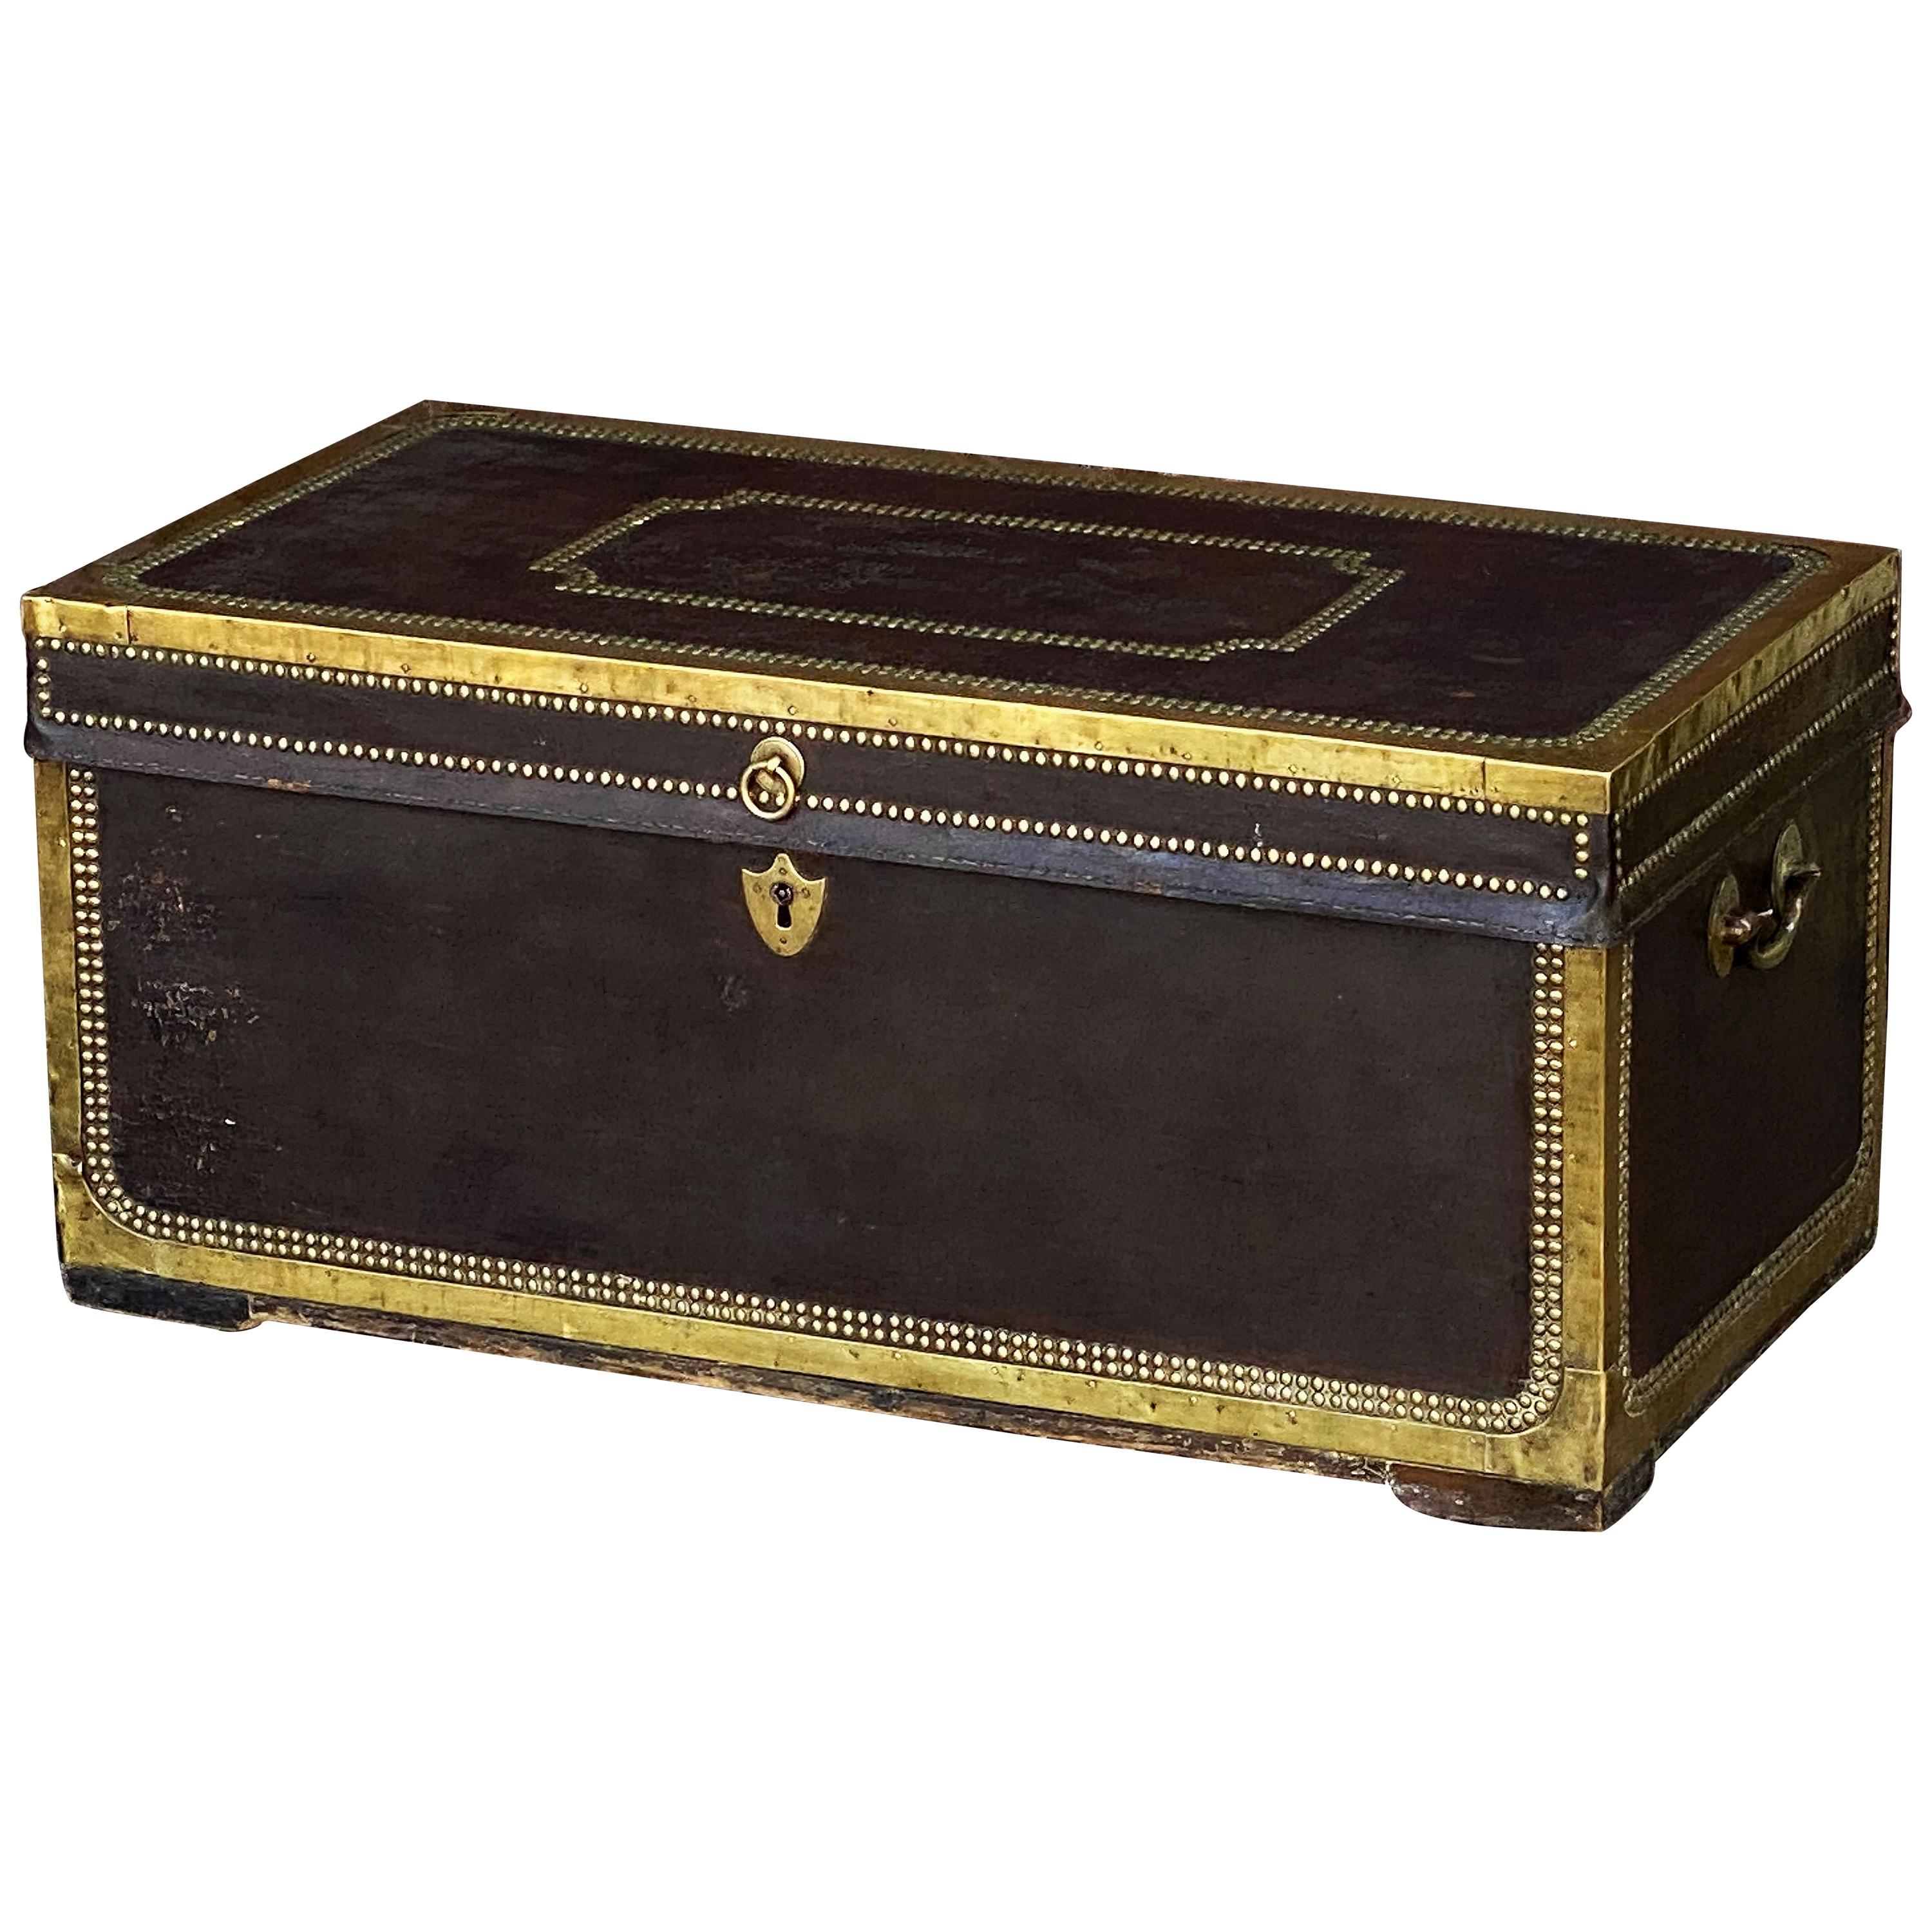 English Campaign Trunk of Brass-Bound Leather and Camphor Wood, Circa 1820